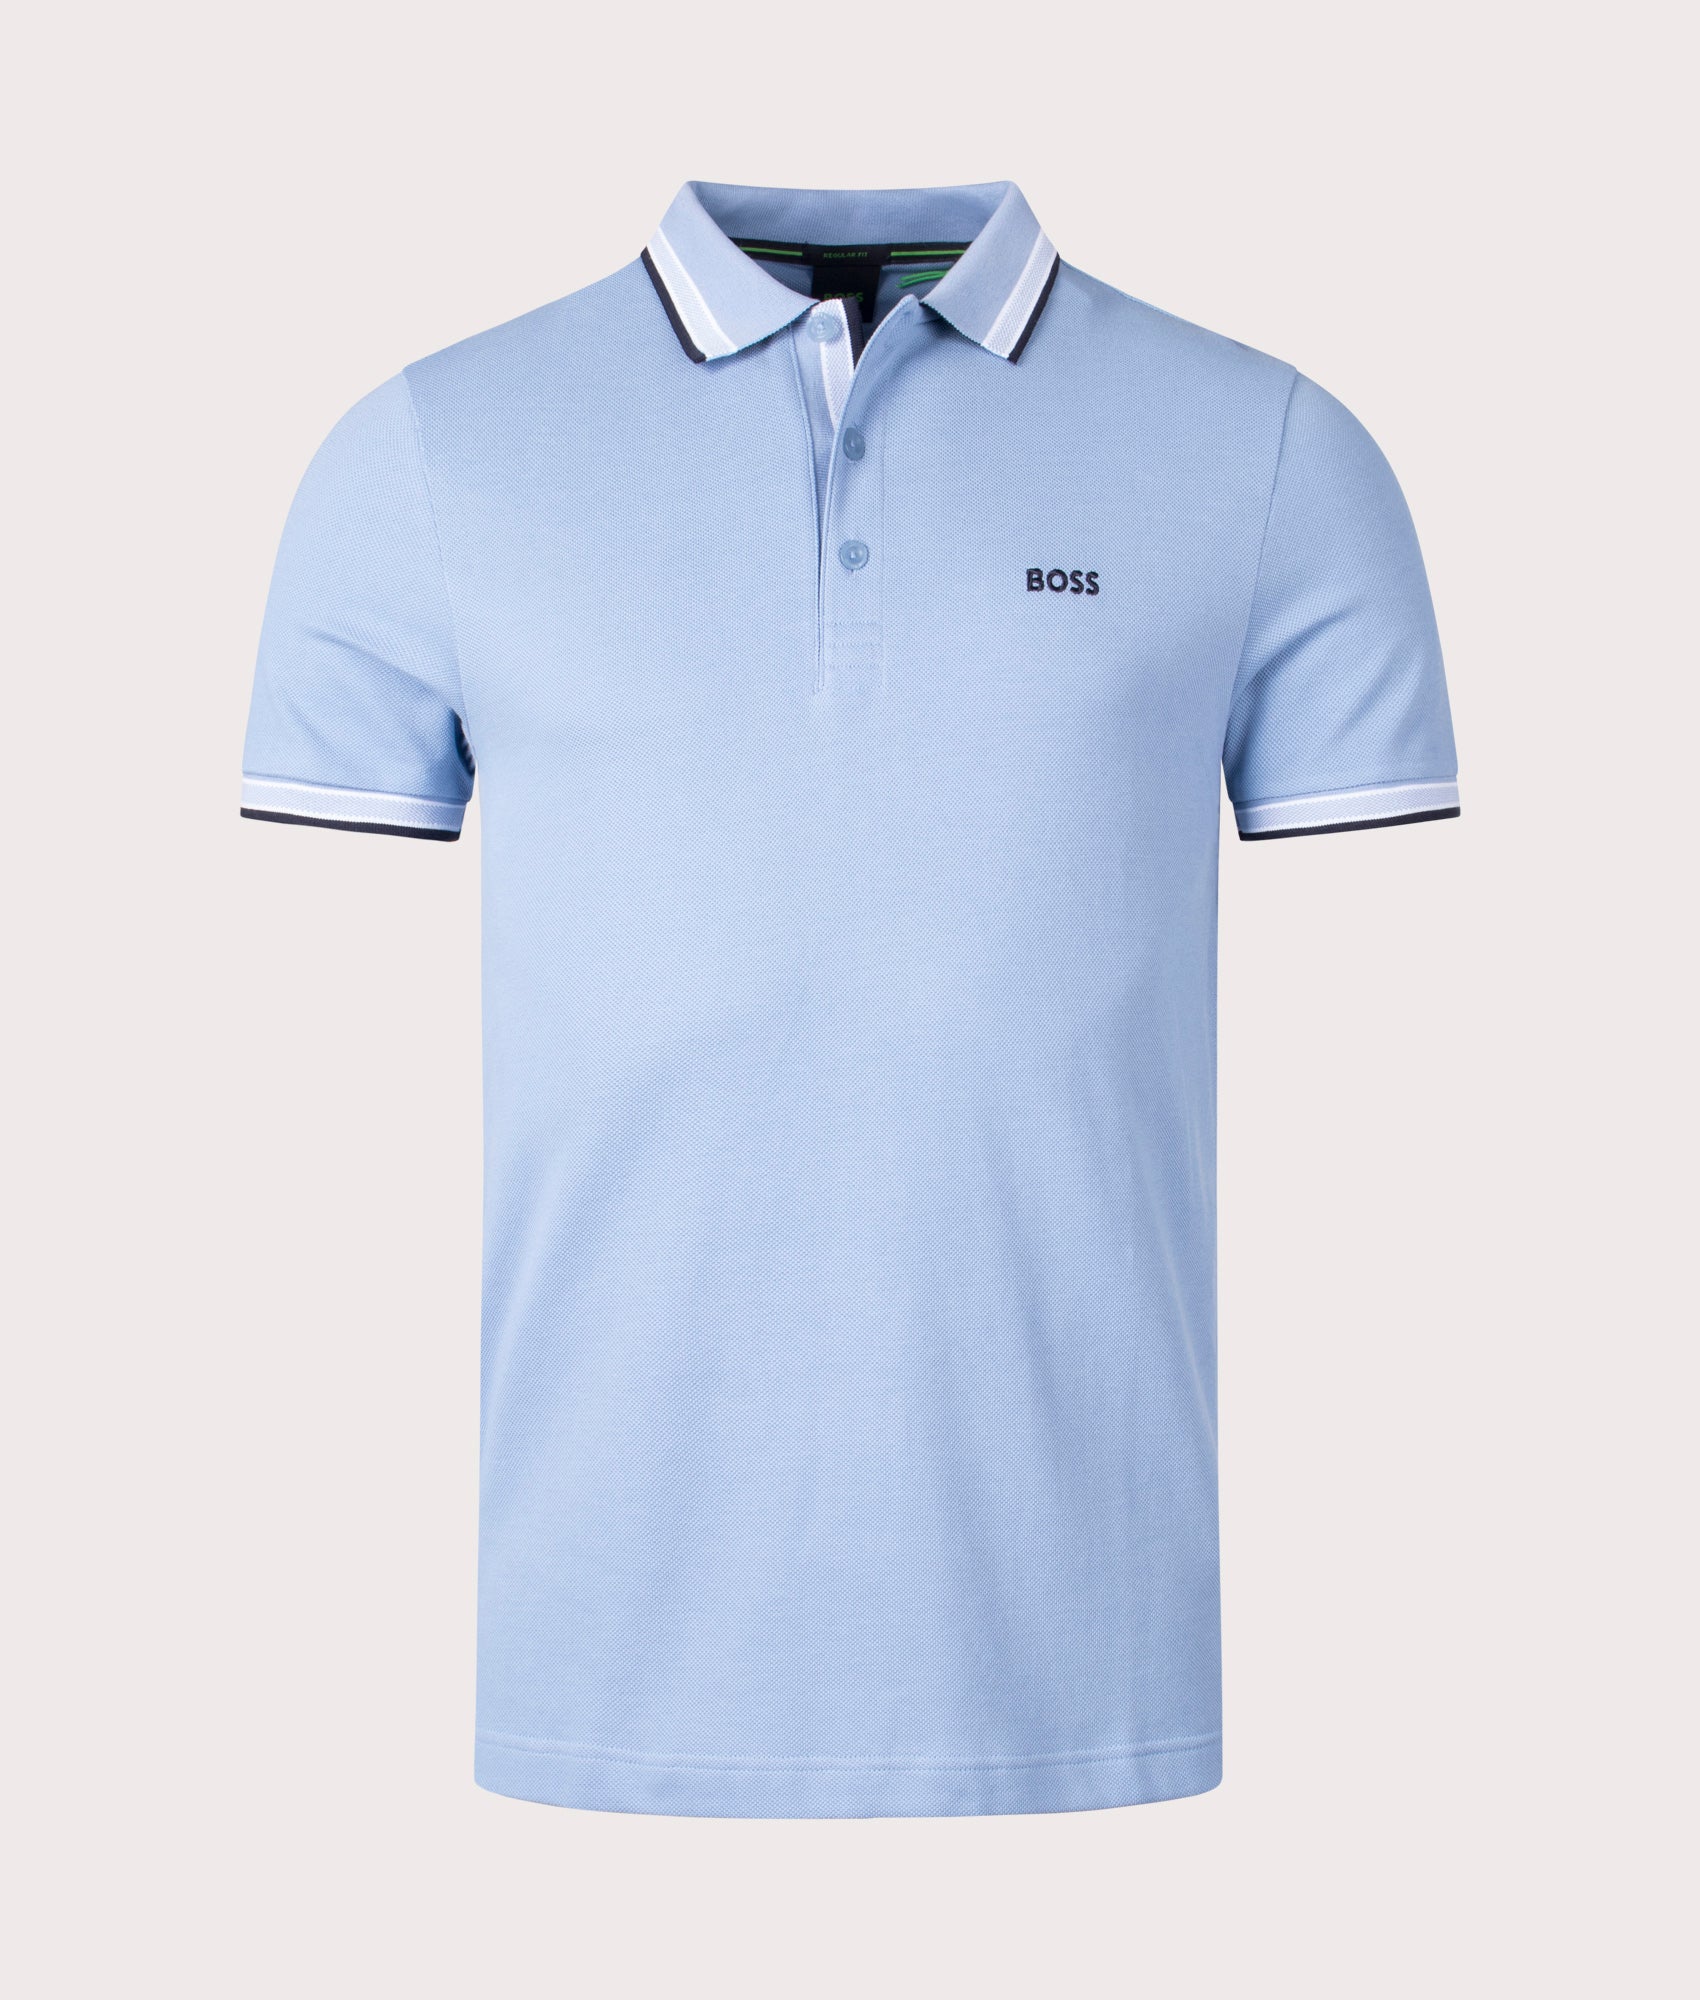 BOSS Mens Paddy Polo Shirt - Colour: 498 Open Blue - Size: Large